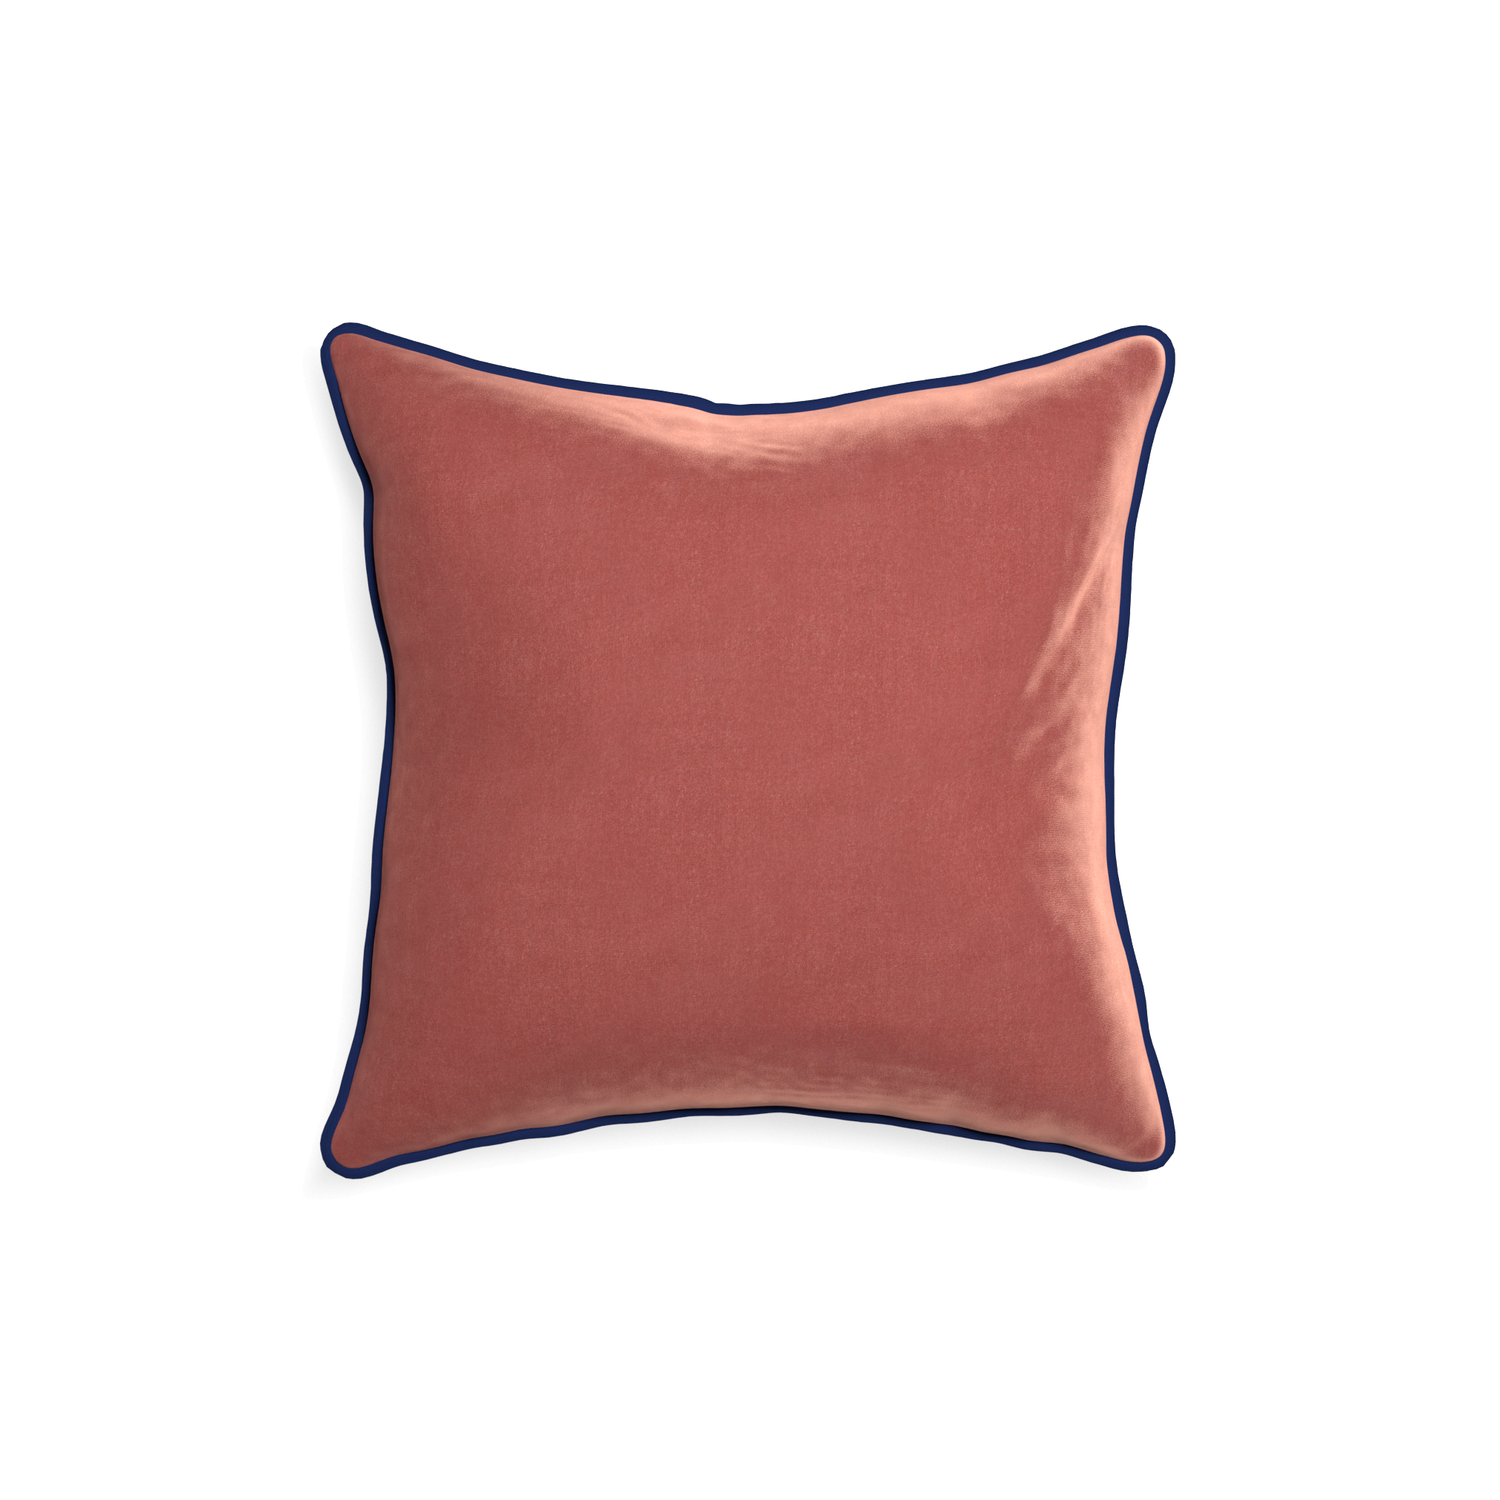 square coral velvet pillow with navy blue piping